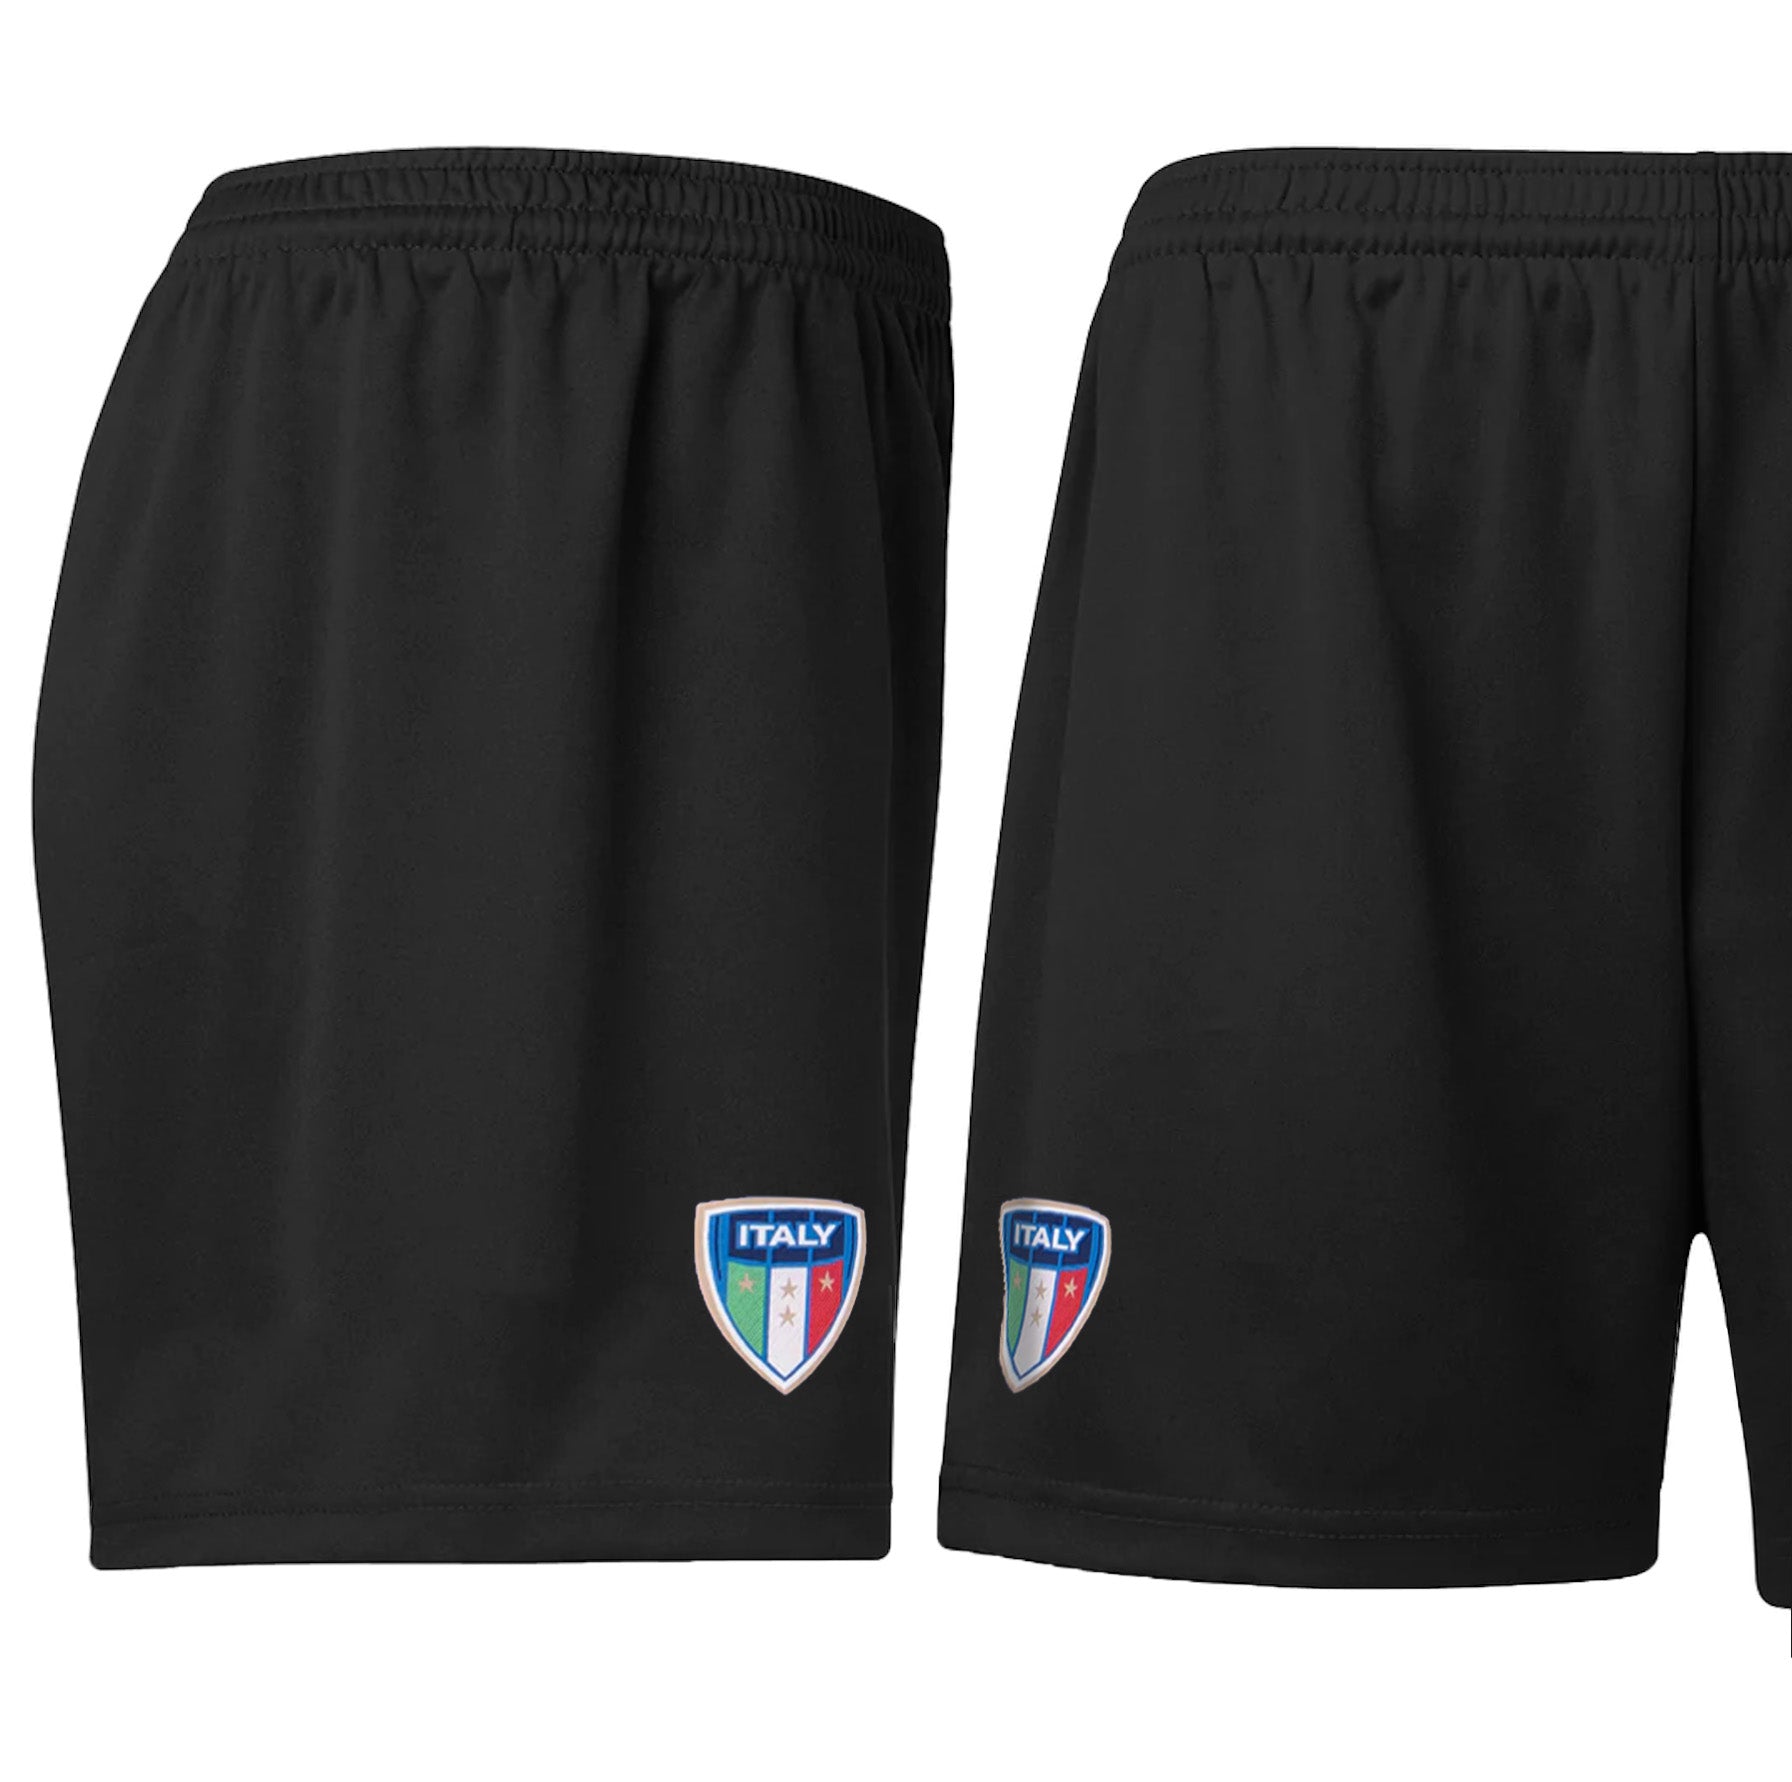 itlay lightweight shorts